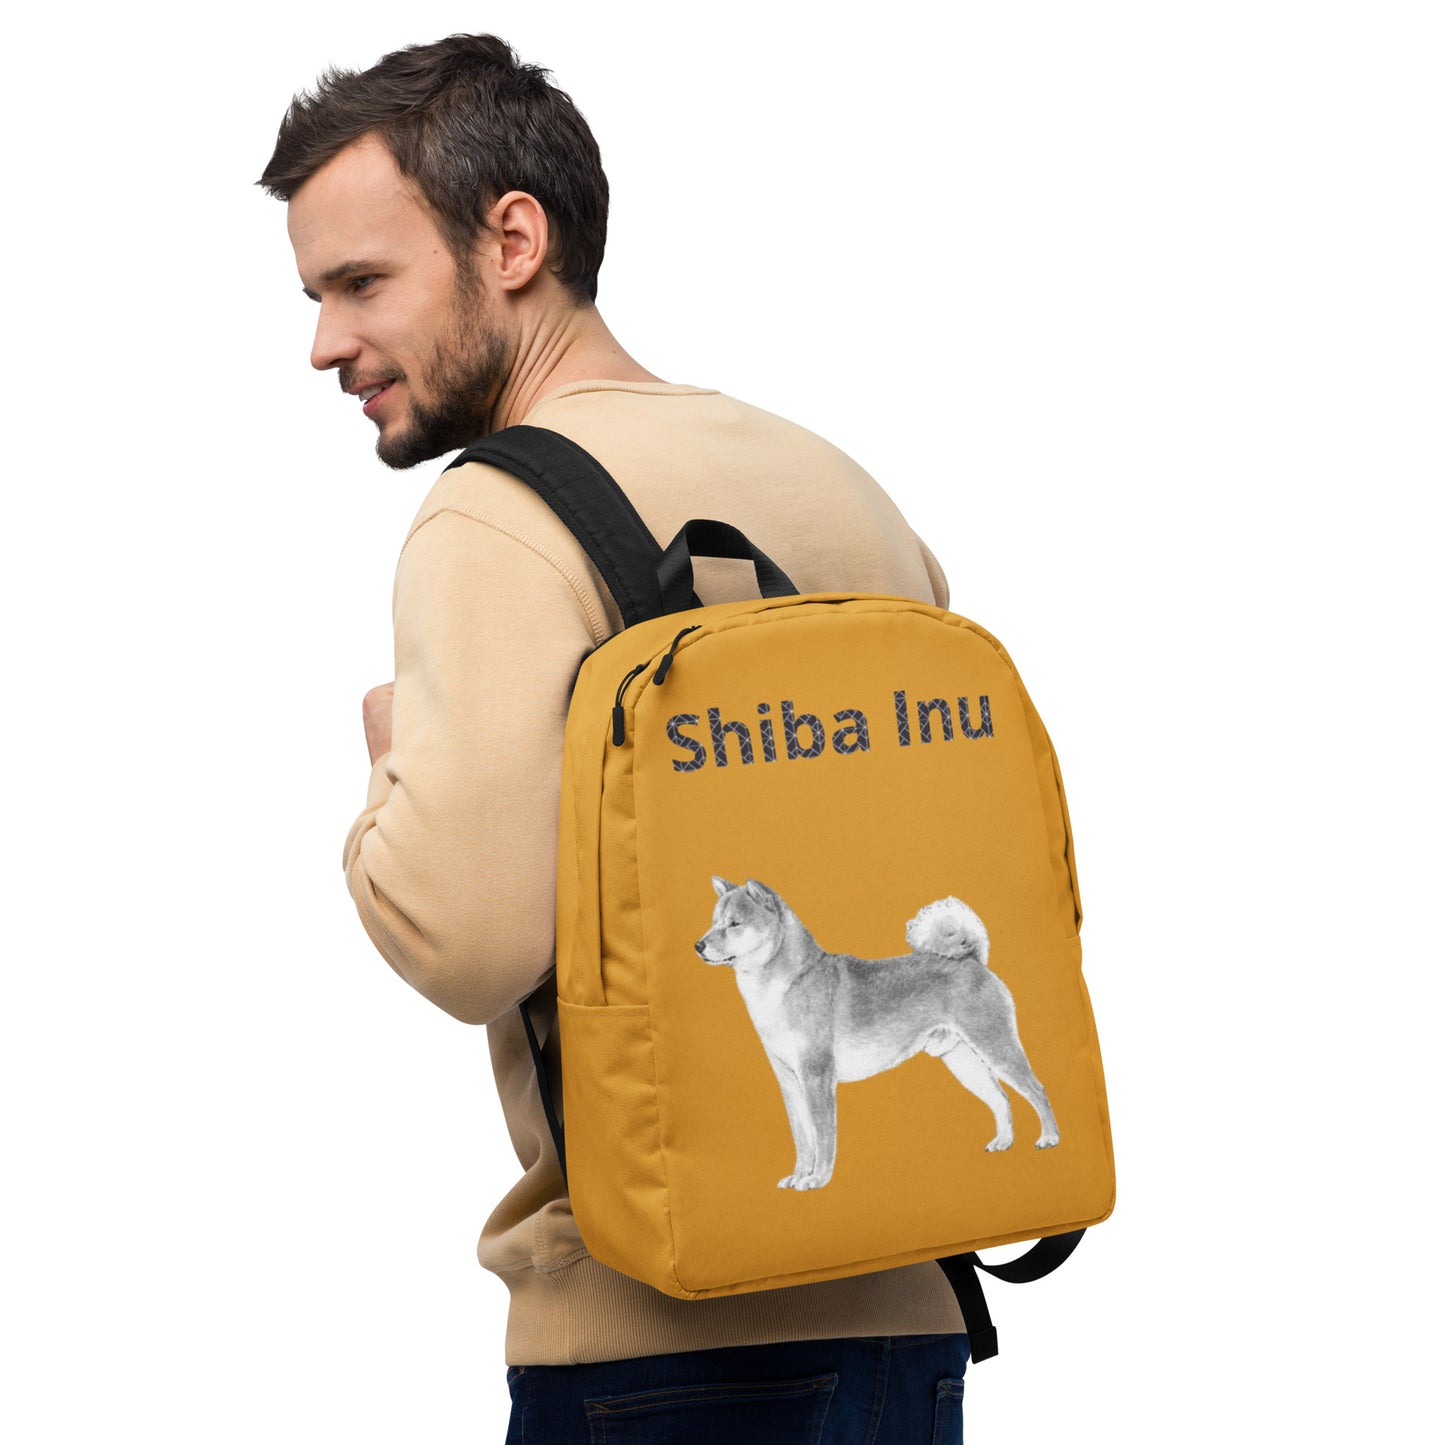 Shiba Inu Minimalist Backpack | BKLA | Shoes & Accessories | shoes, hats, phone covers, tote bags, clutch bags